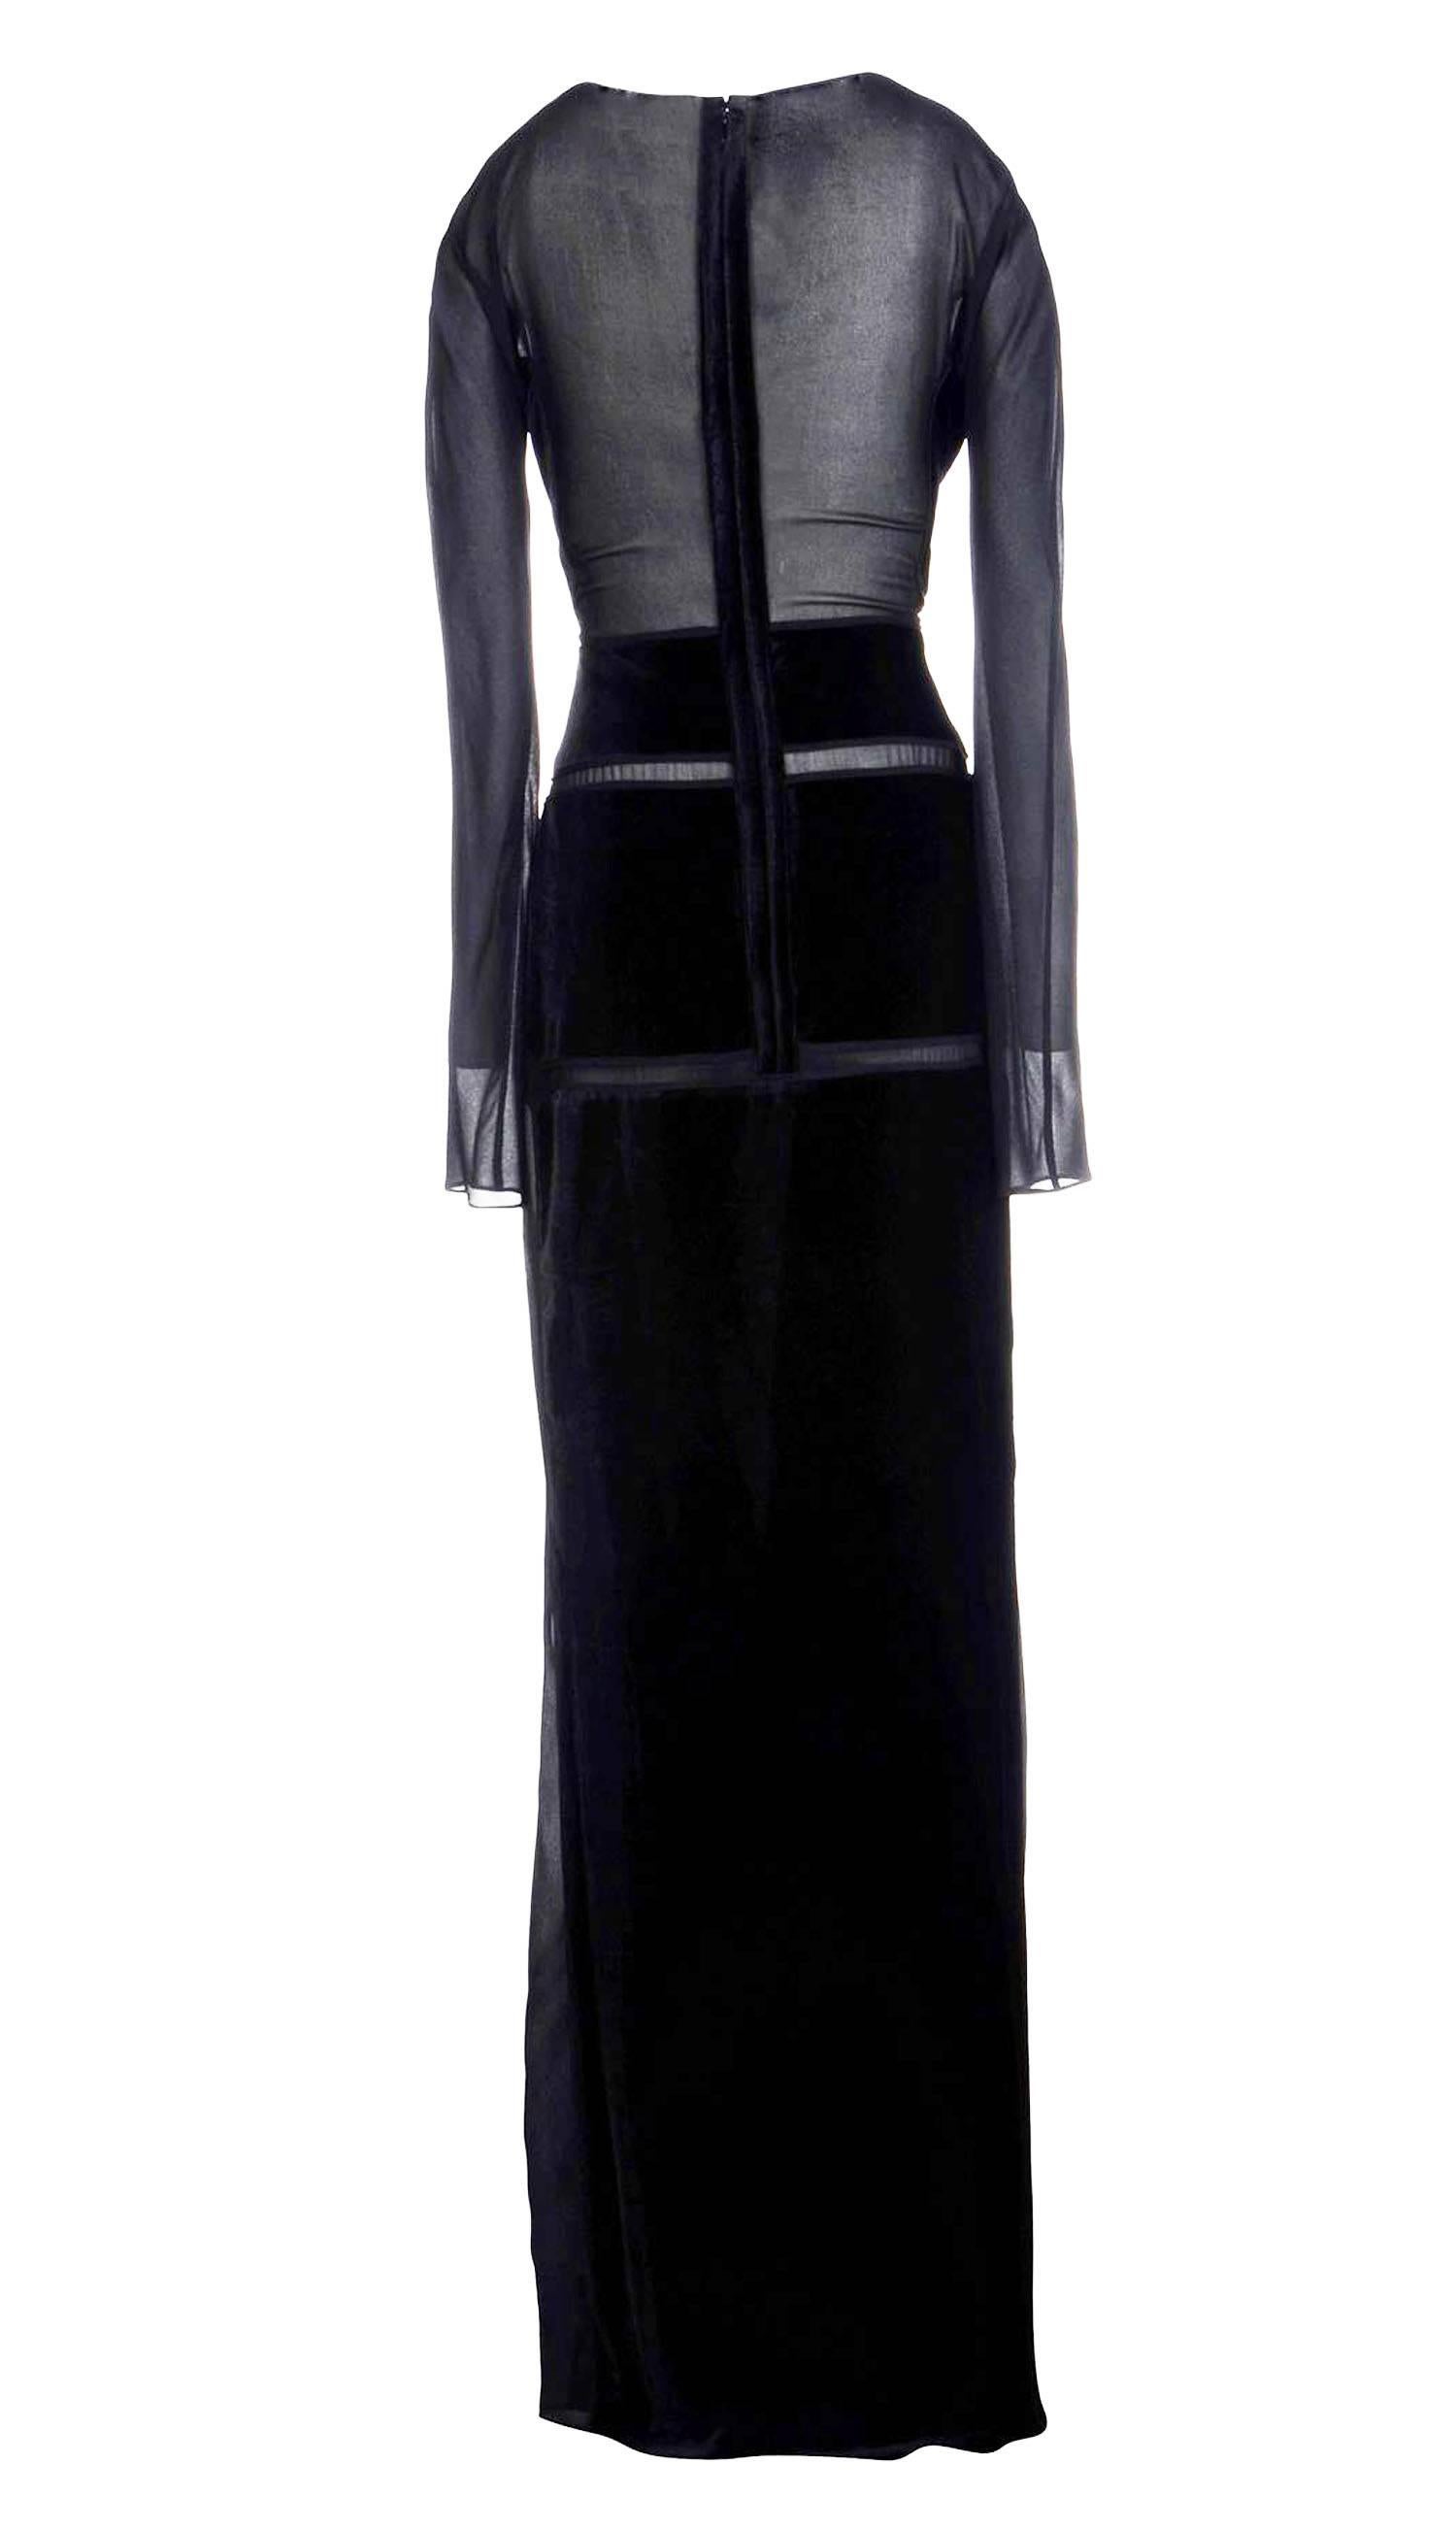 New Tom Ford Ad Campaign Velvet Gown

Italian size 42 - US 6
Black Velvet & Sheer Chiffon
Made in Italy
New with tag.